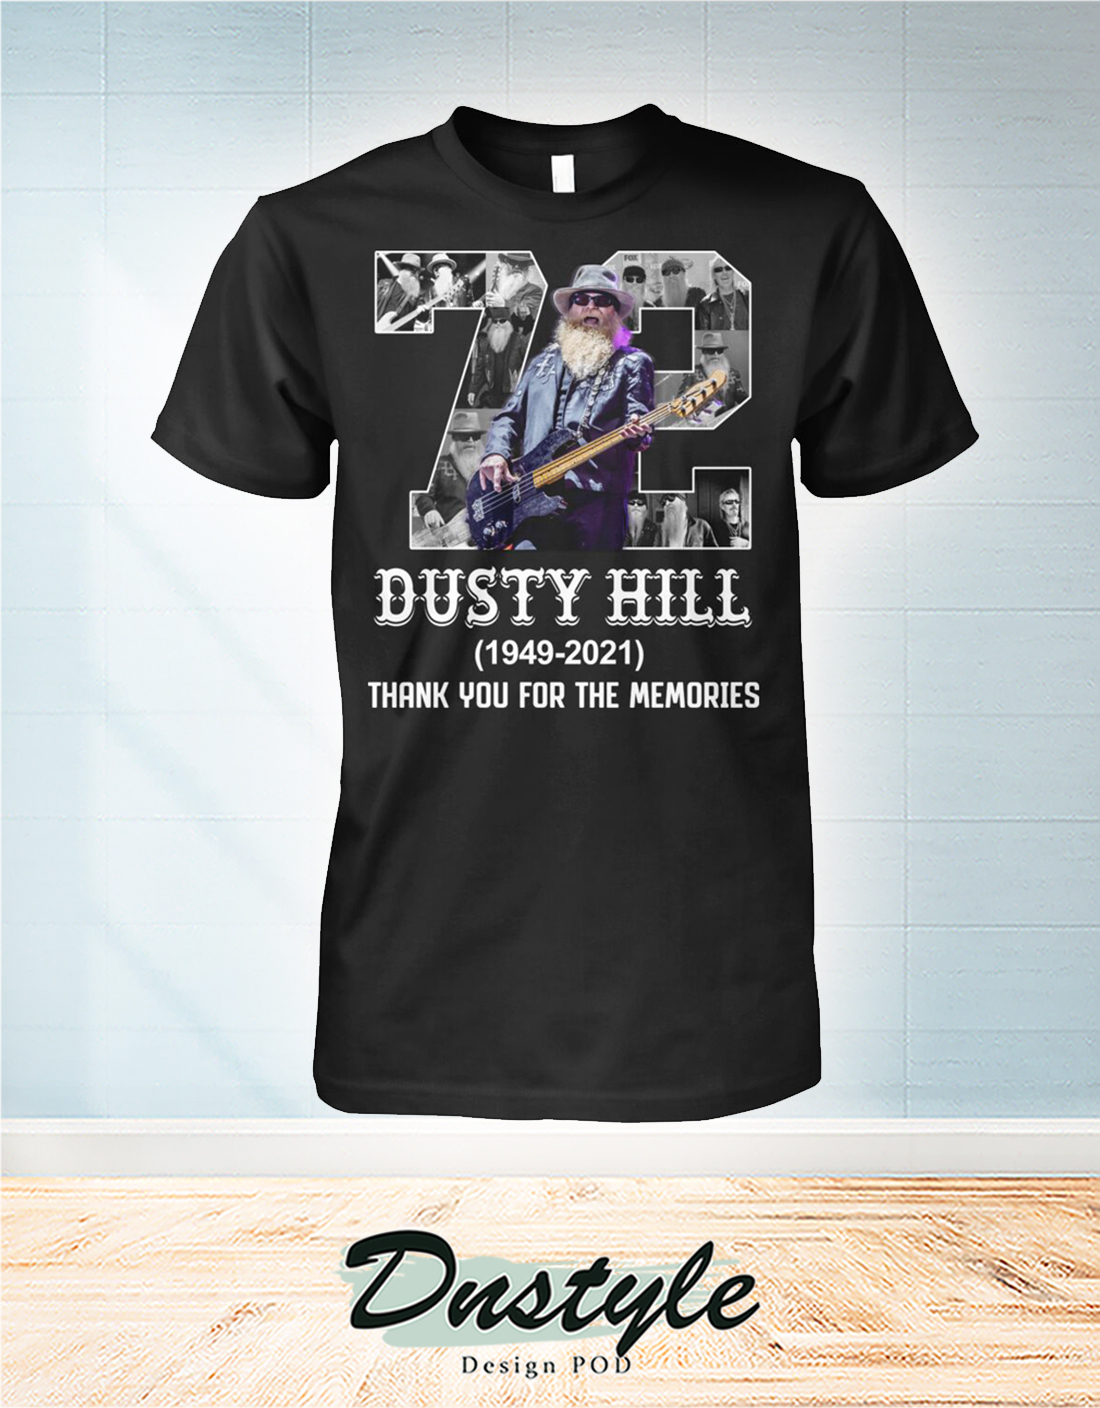 72 Dusty Hill thanks for the memories shirt